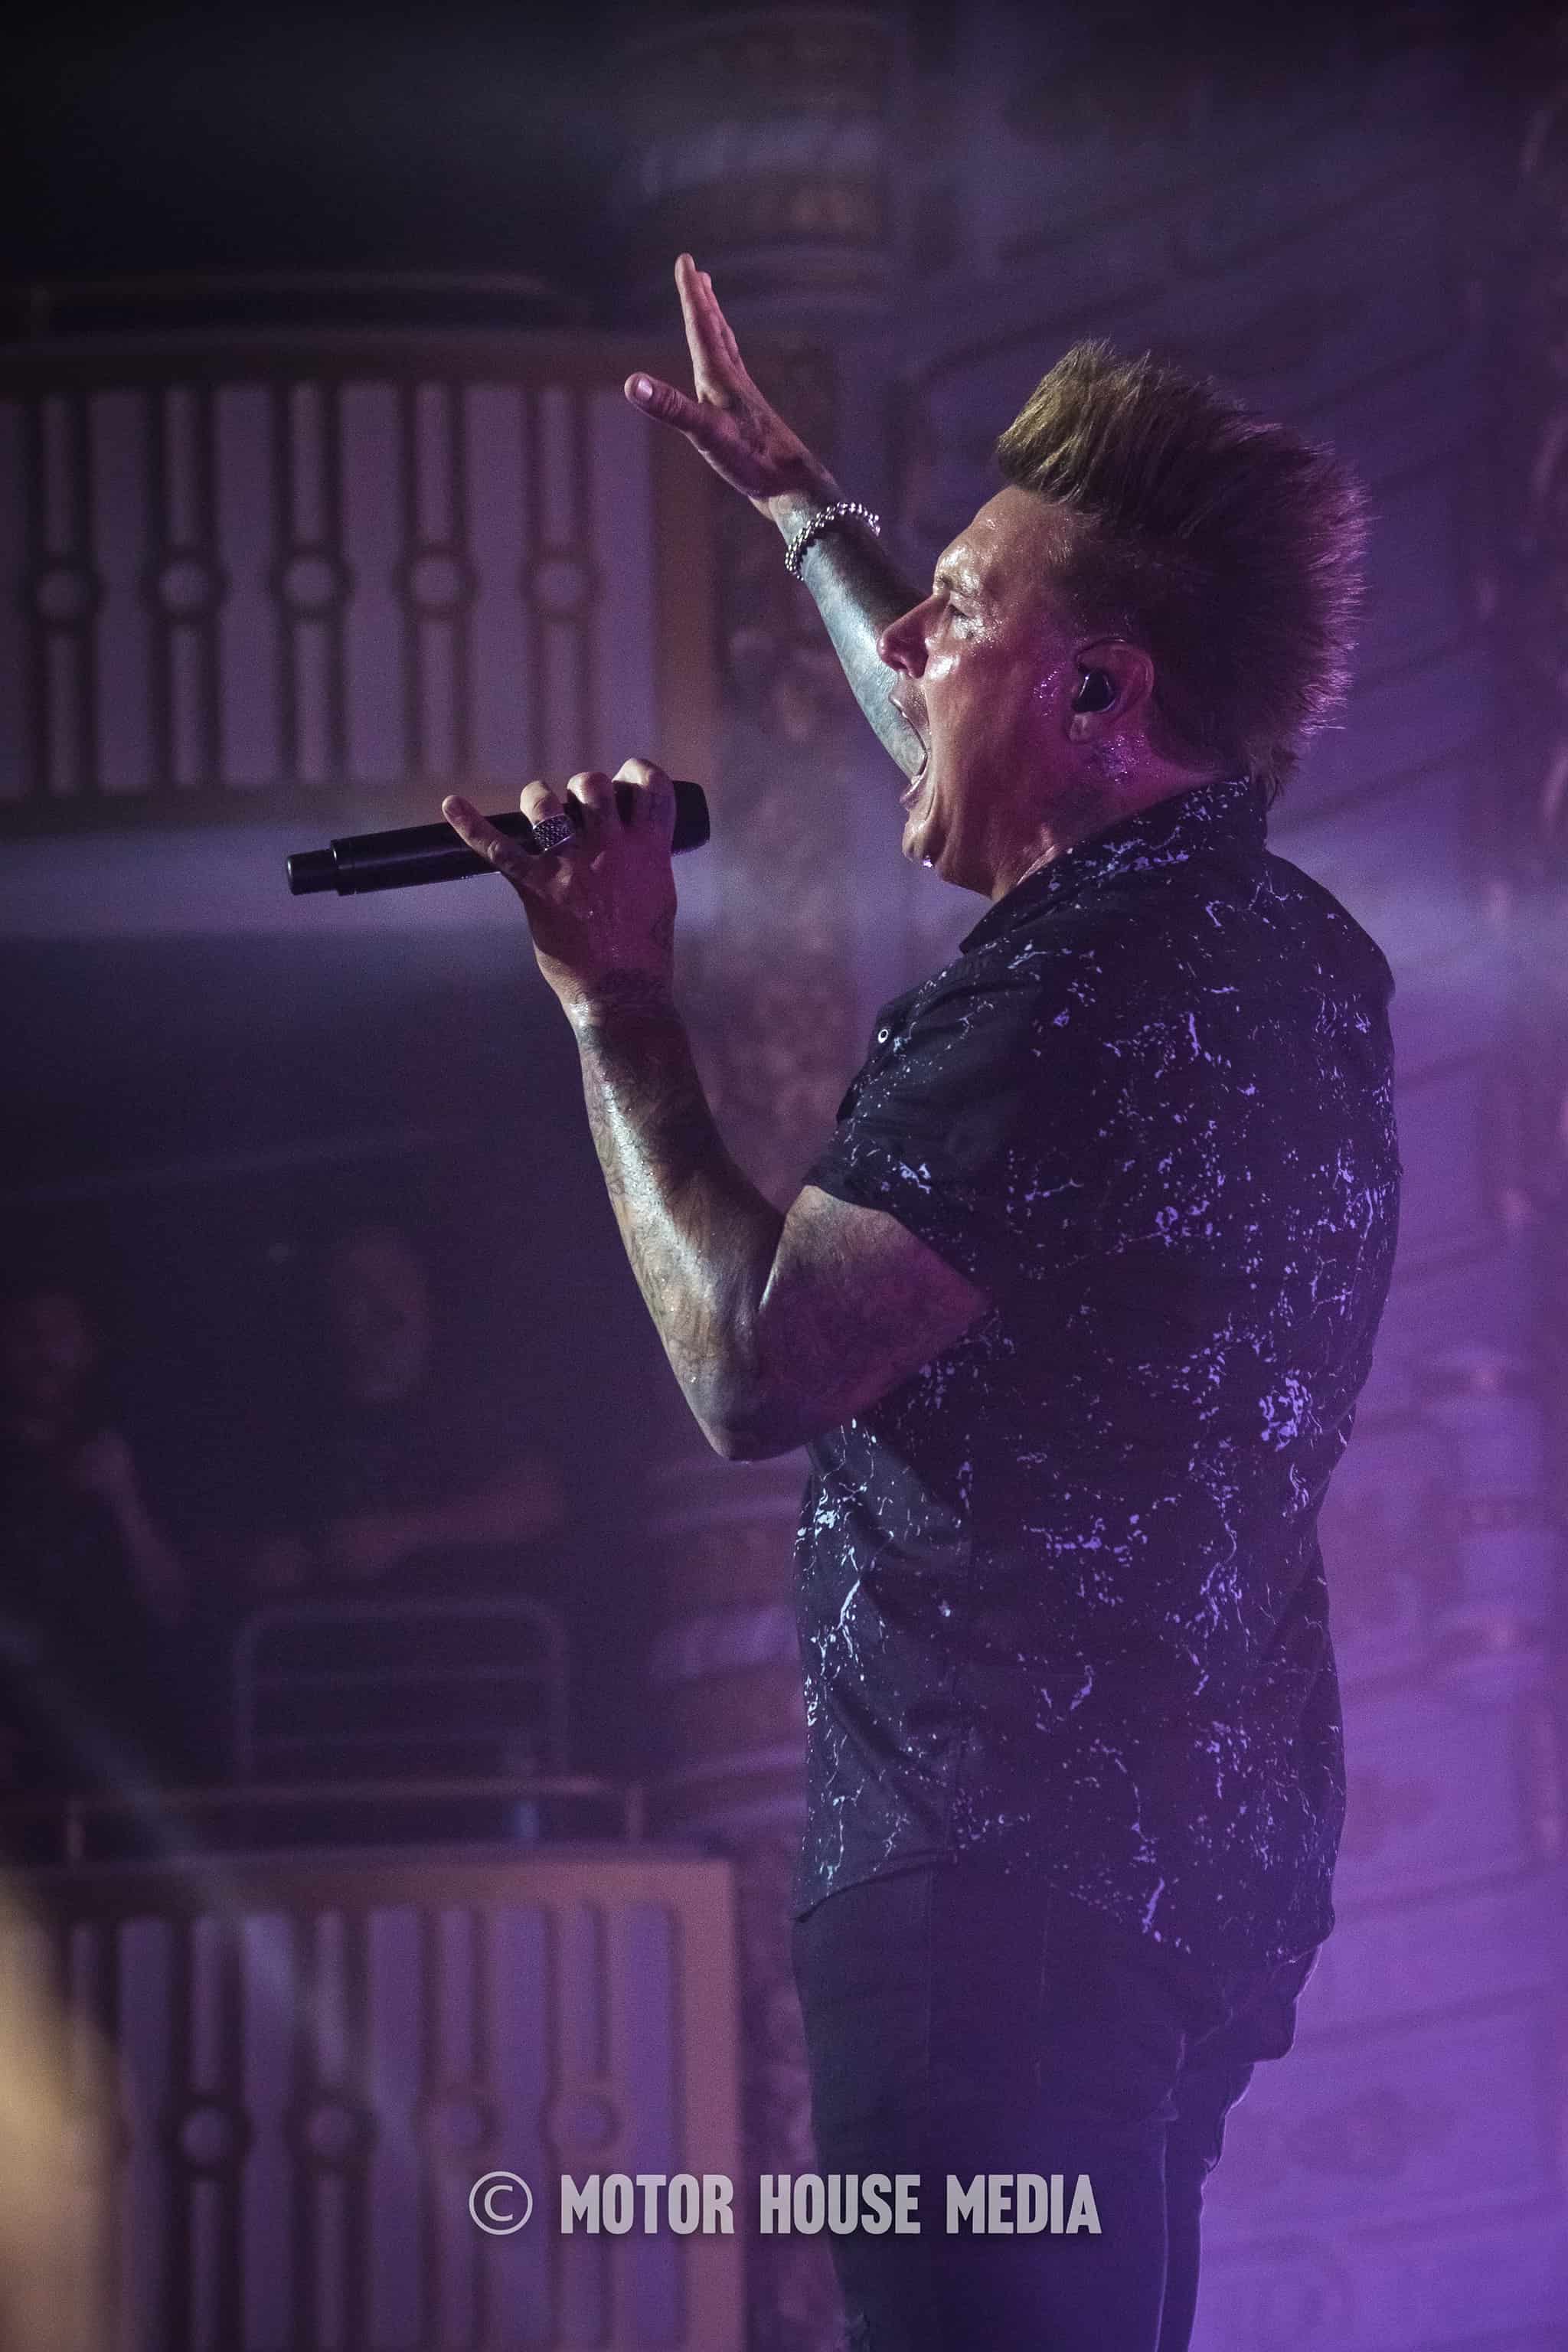 Jacoby Shaddix belting it out